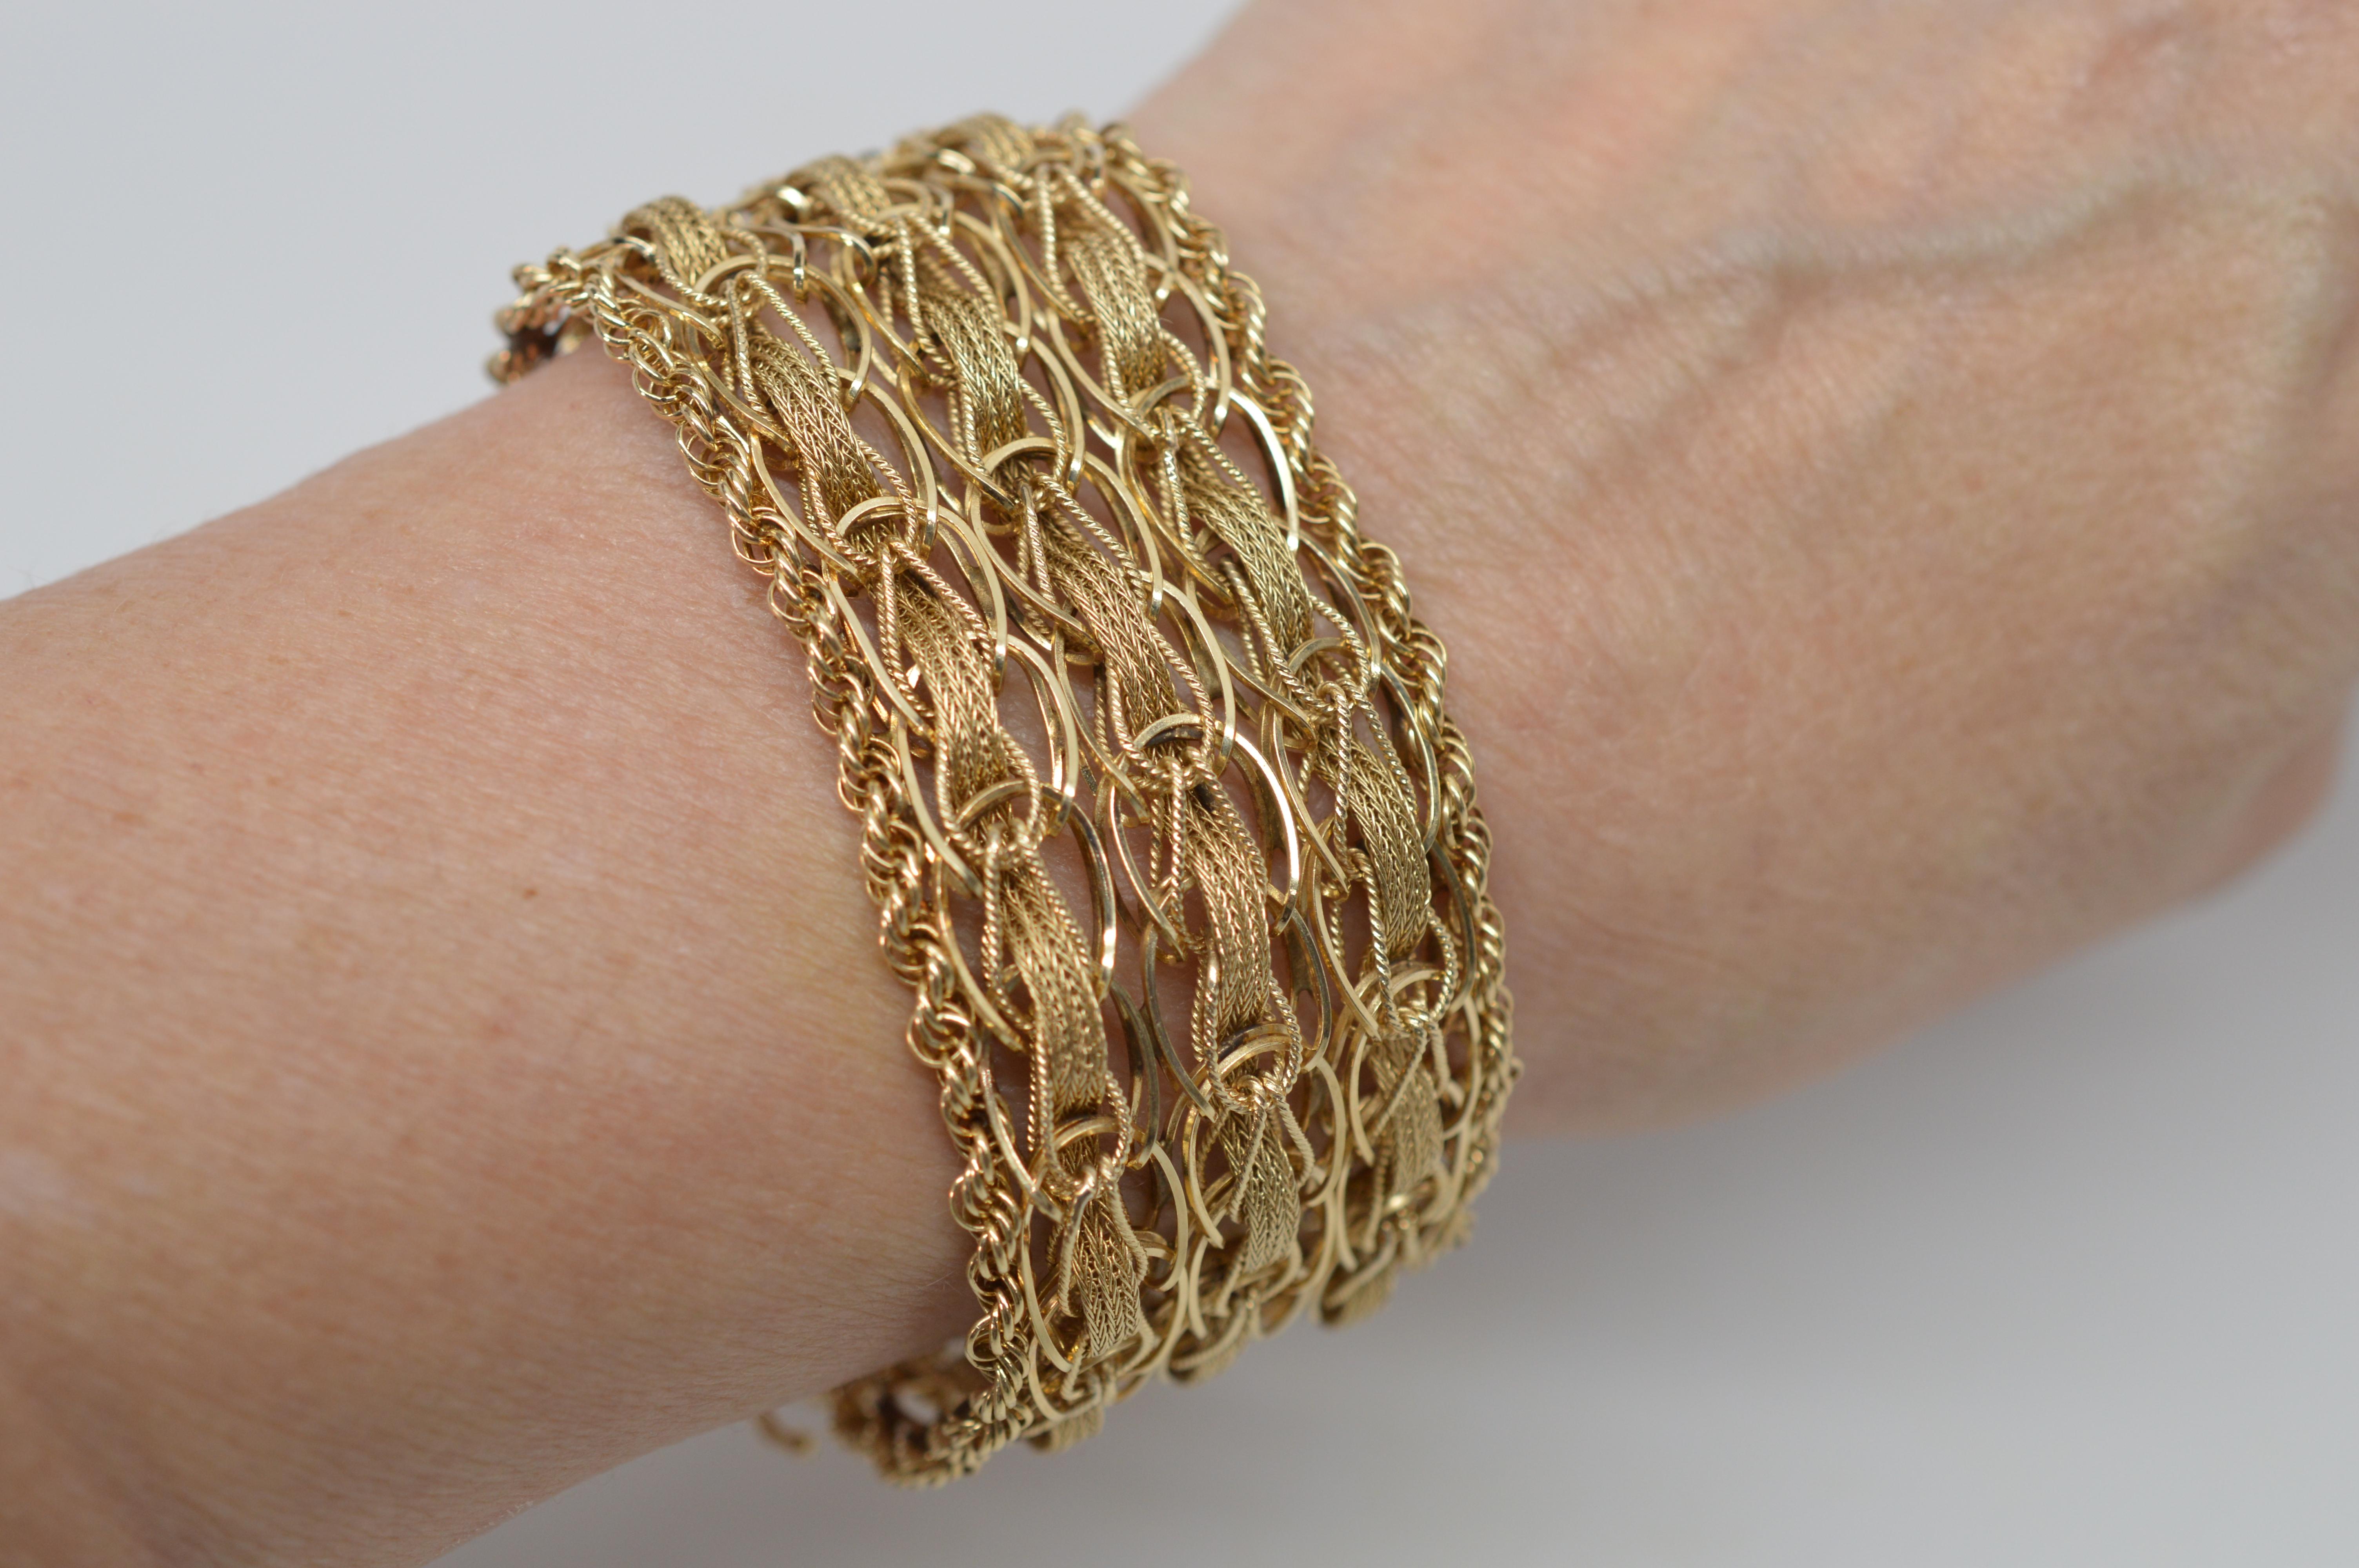 This will easily become your go to piece, made of plentiful lengths of 14 Karat Yellow Gold rope woven into a spectacular 1-1/4 inch wide bracelet with attractive texture and dimension. Circa 1960's and constructed with slide clasp and safety, this